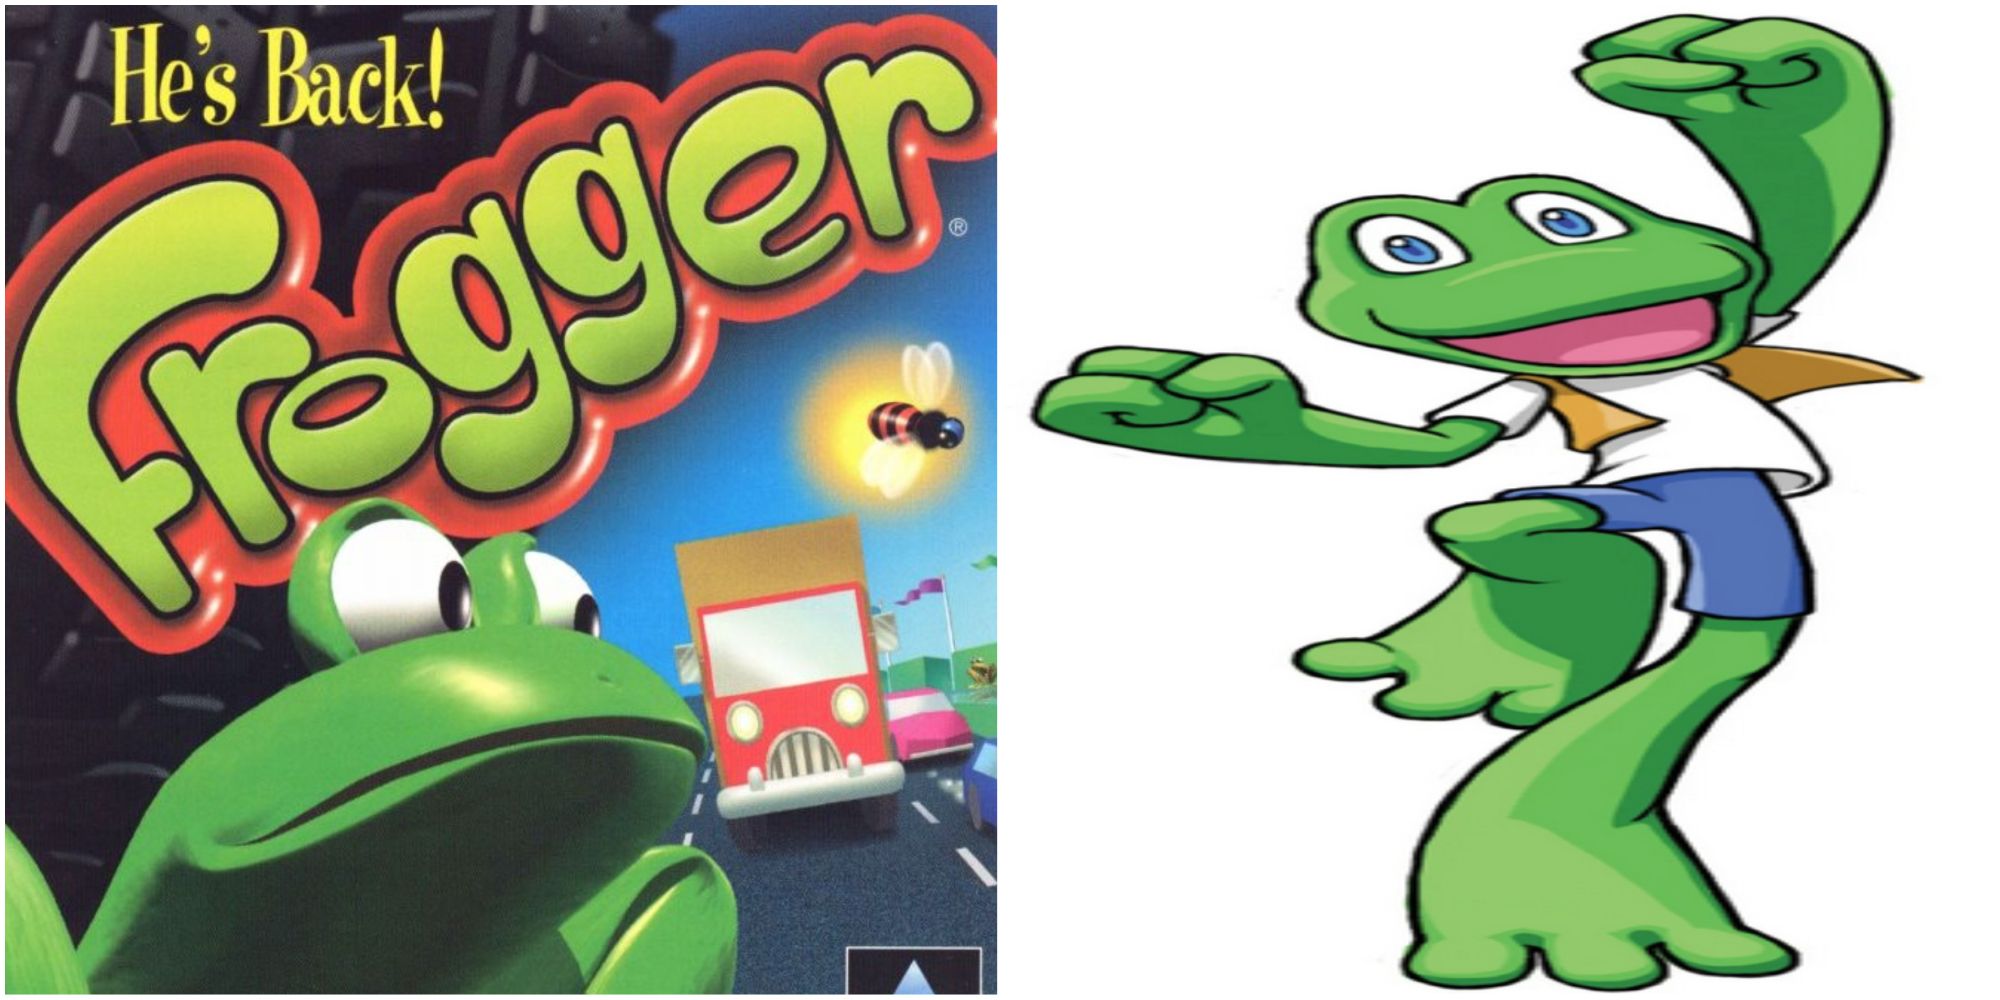 frogger cover & character